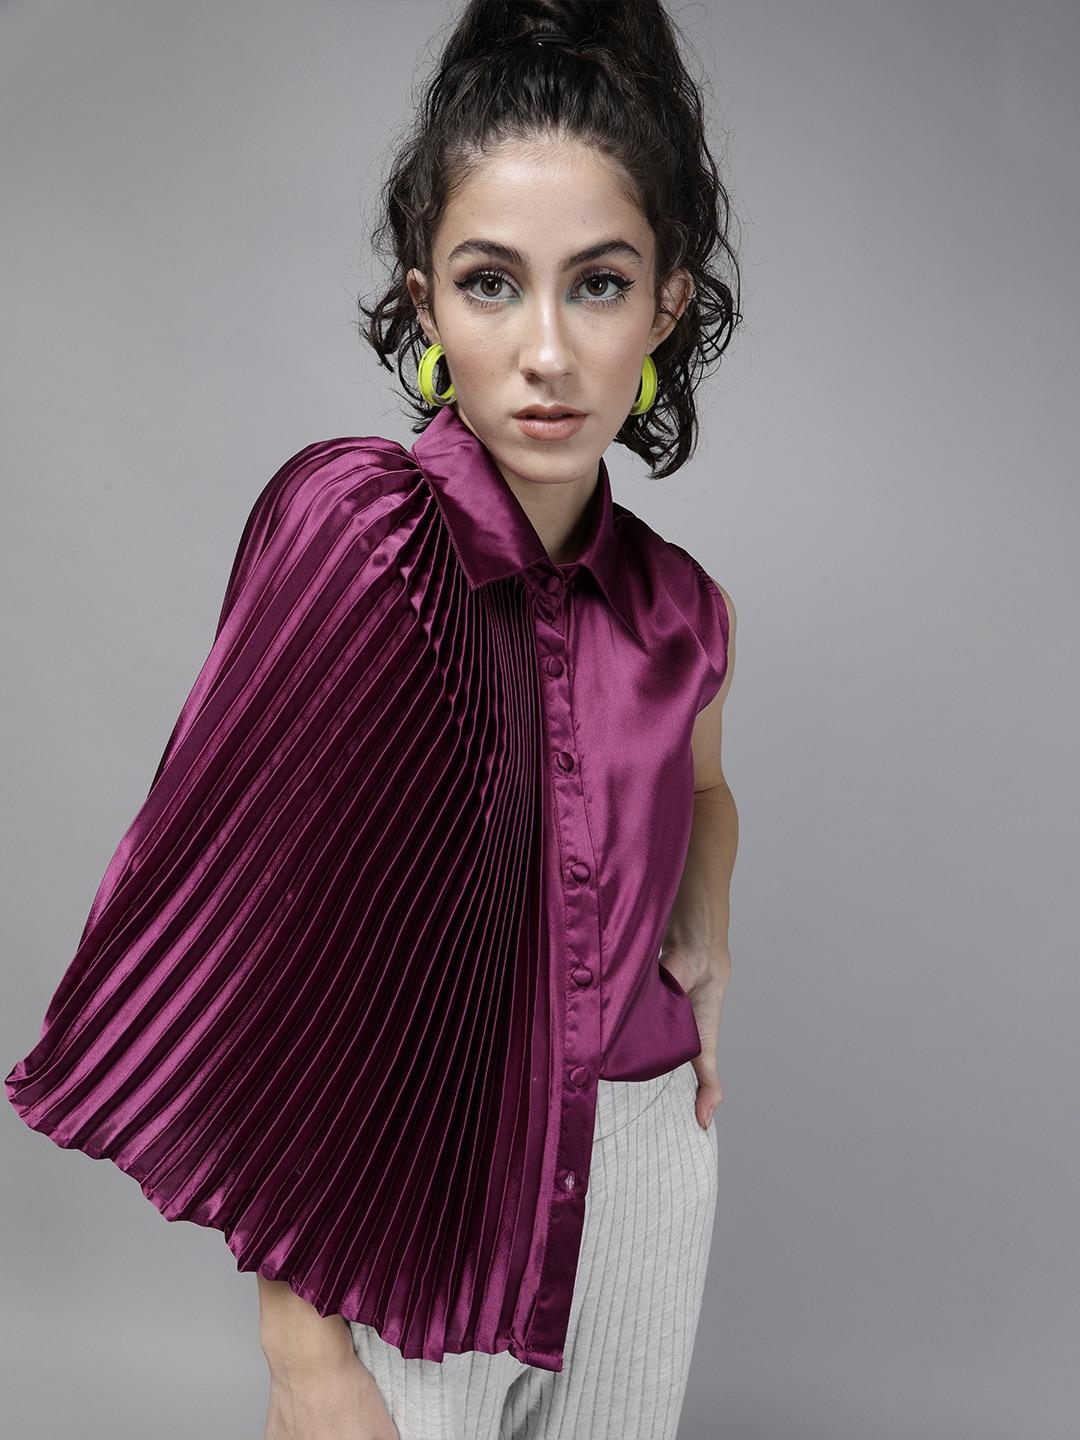 the dry state purple accordion pleated sleeves accordion pleats satin shirt style top